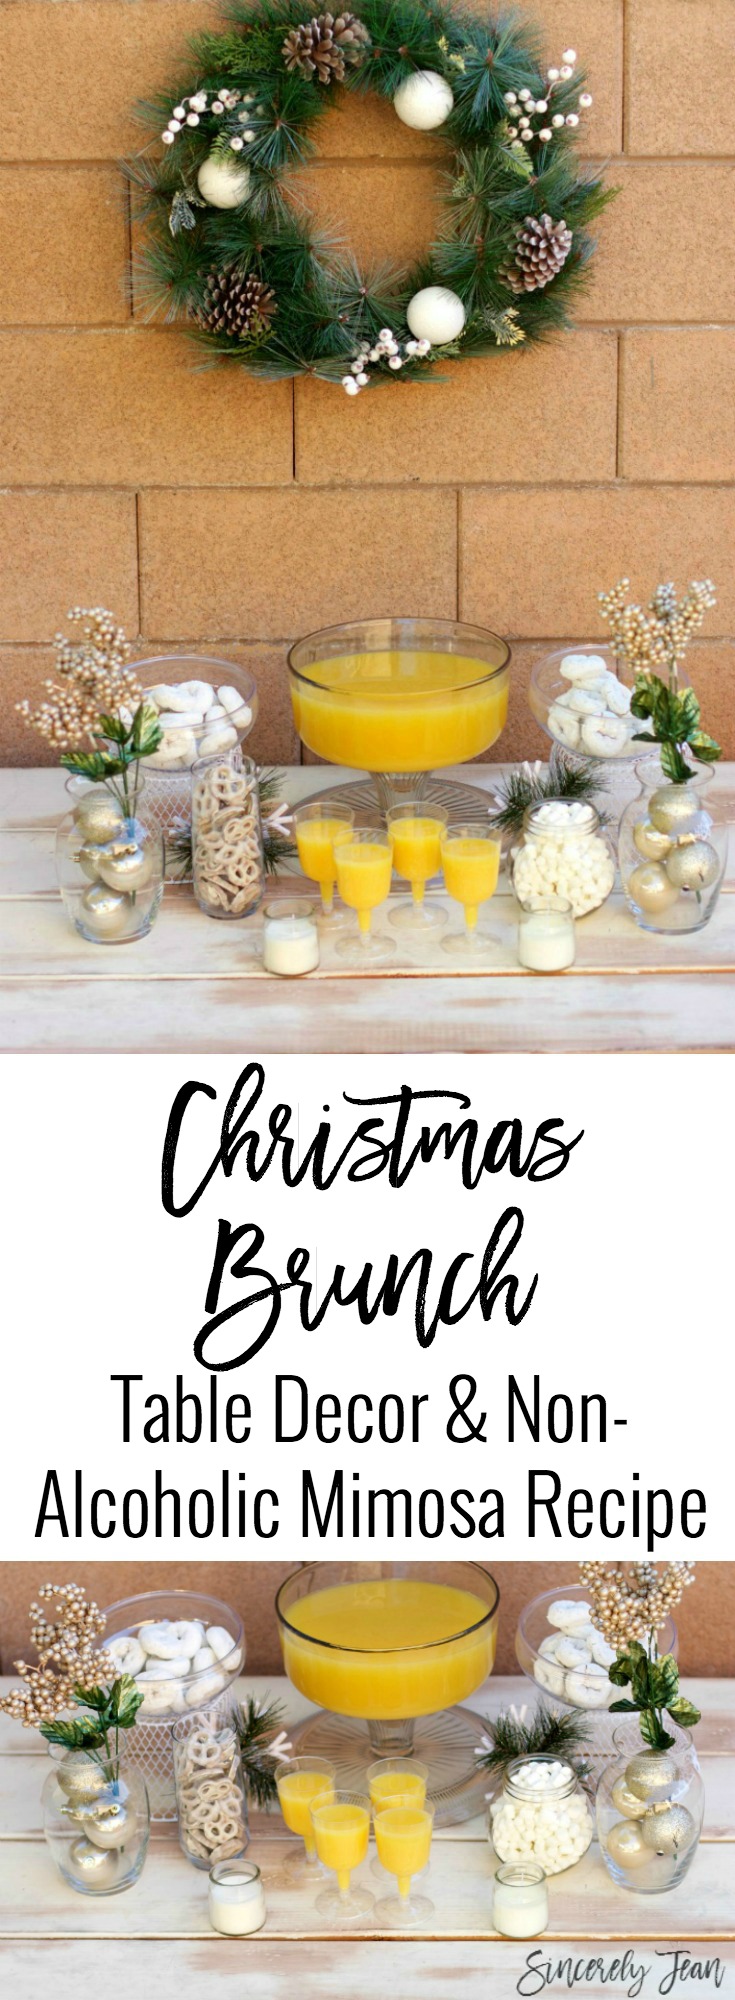 SincerelyJean.com - Check out our Christmas Brunch table decor and mimosa (virgin) recipe